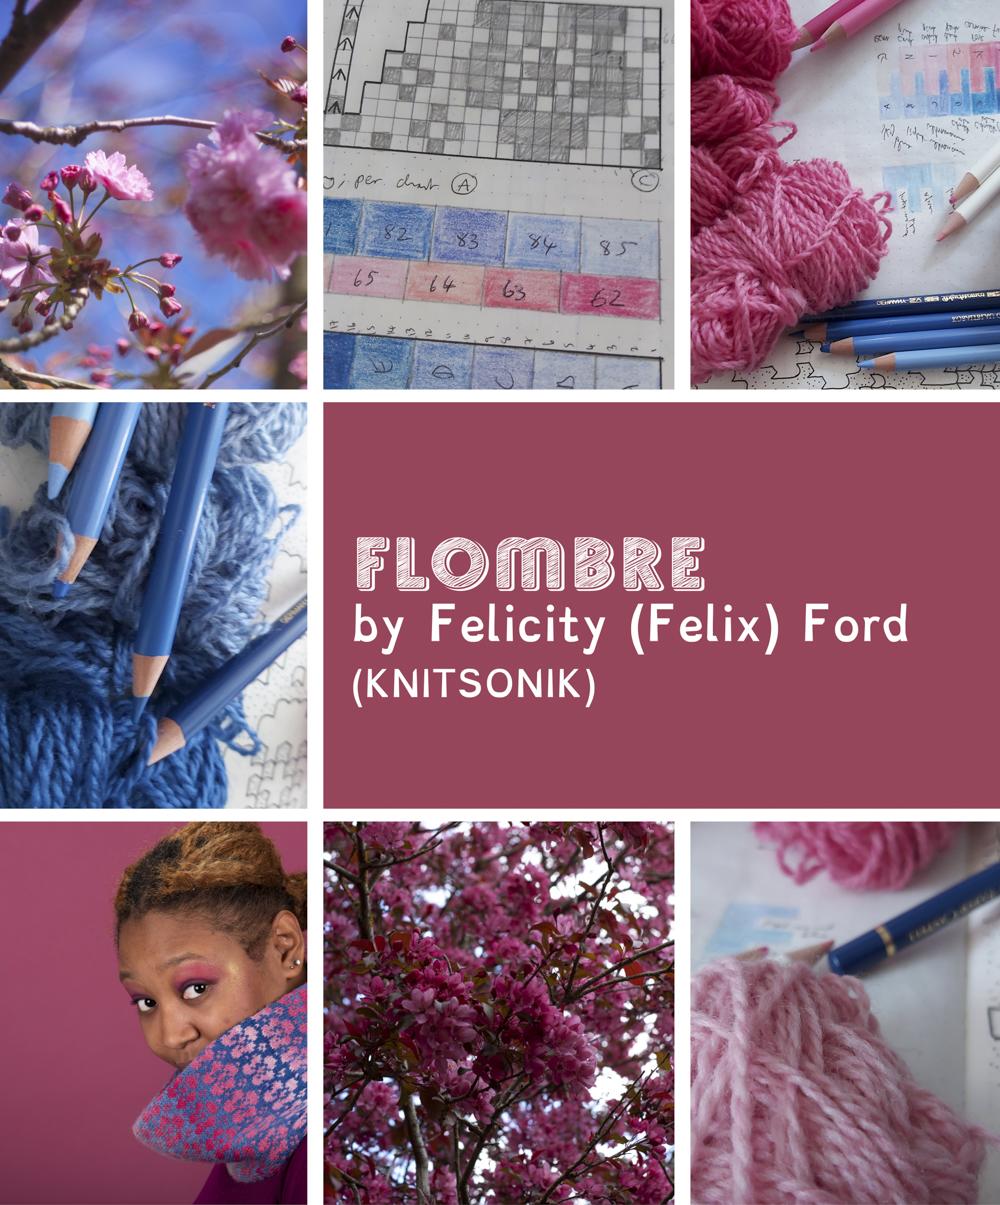 Flombre by Felicity (Felix) Ford (KNITSONIK) - composite image in grid-form showing design stages of a floral/ombre matching set of mittens, hat and cowl. The set is clearly inspired by cherry blossoms and images showing this inspiration source plus matching yarn shades and pencils are shown, along with drawings and charts